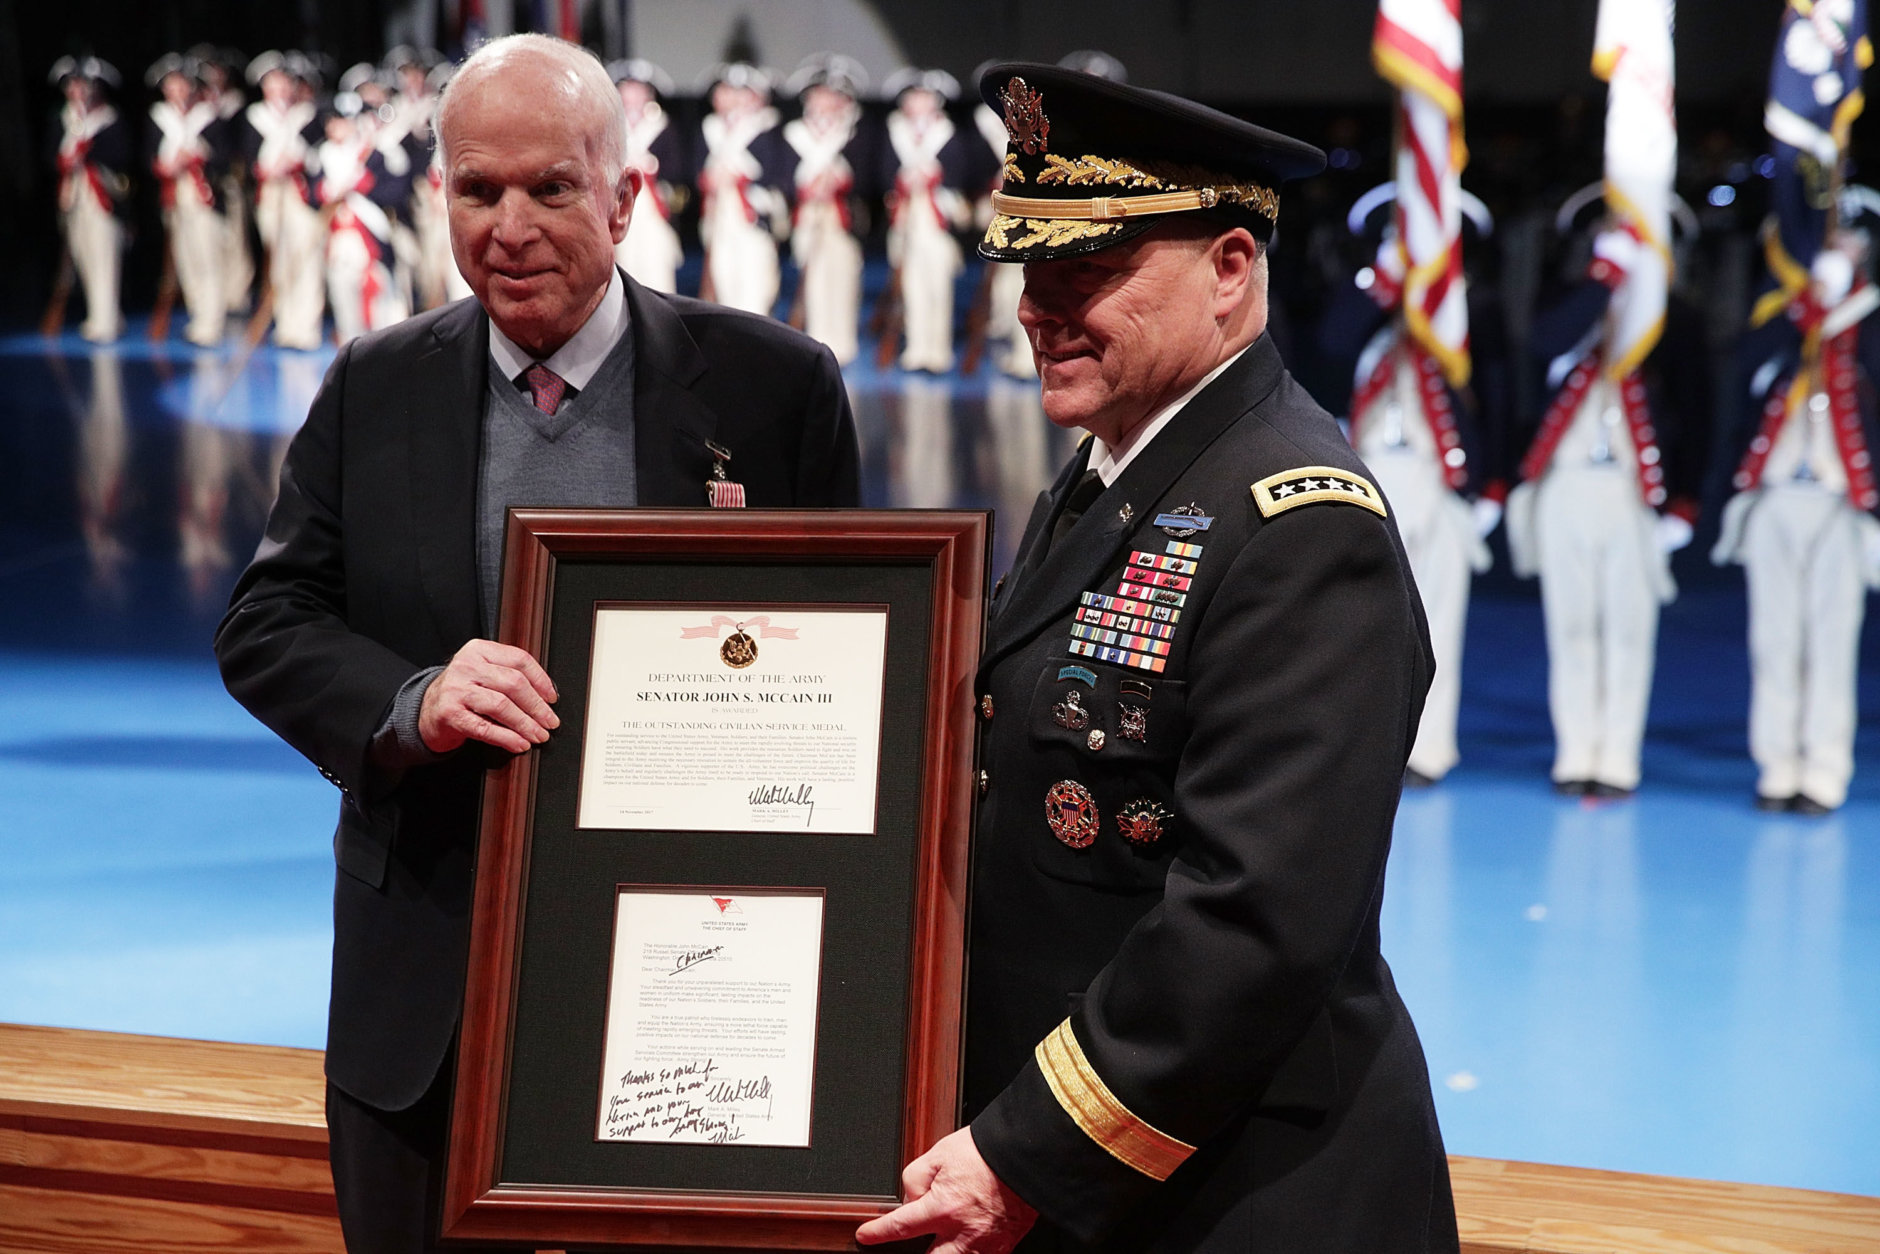 U.S. Army Chief of Staff Gen. Mark A. Milley (R) presents Sen. John McCain (R-AZ) (L) with the Outstanding Civilian Service Medal during a special Twilight Tattoo performance Nov. 14, 2017 at Fort Myer in Arlington, Virginia. Sen. McCain was honored for over 63 years of dedicated service to the nation and the U.S. Navy.  (Photo by Alex Wong/Getty Images)